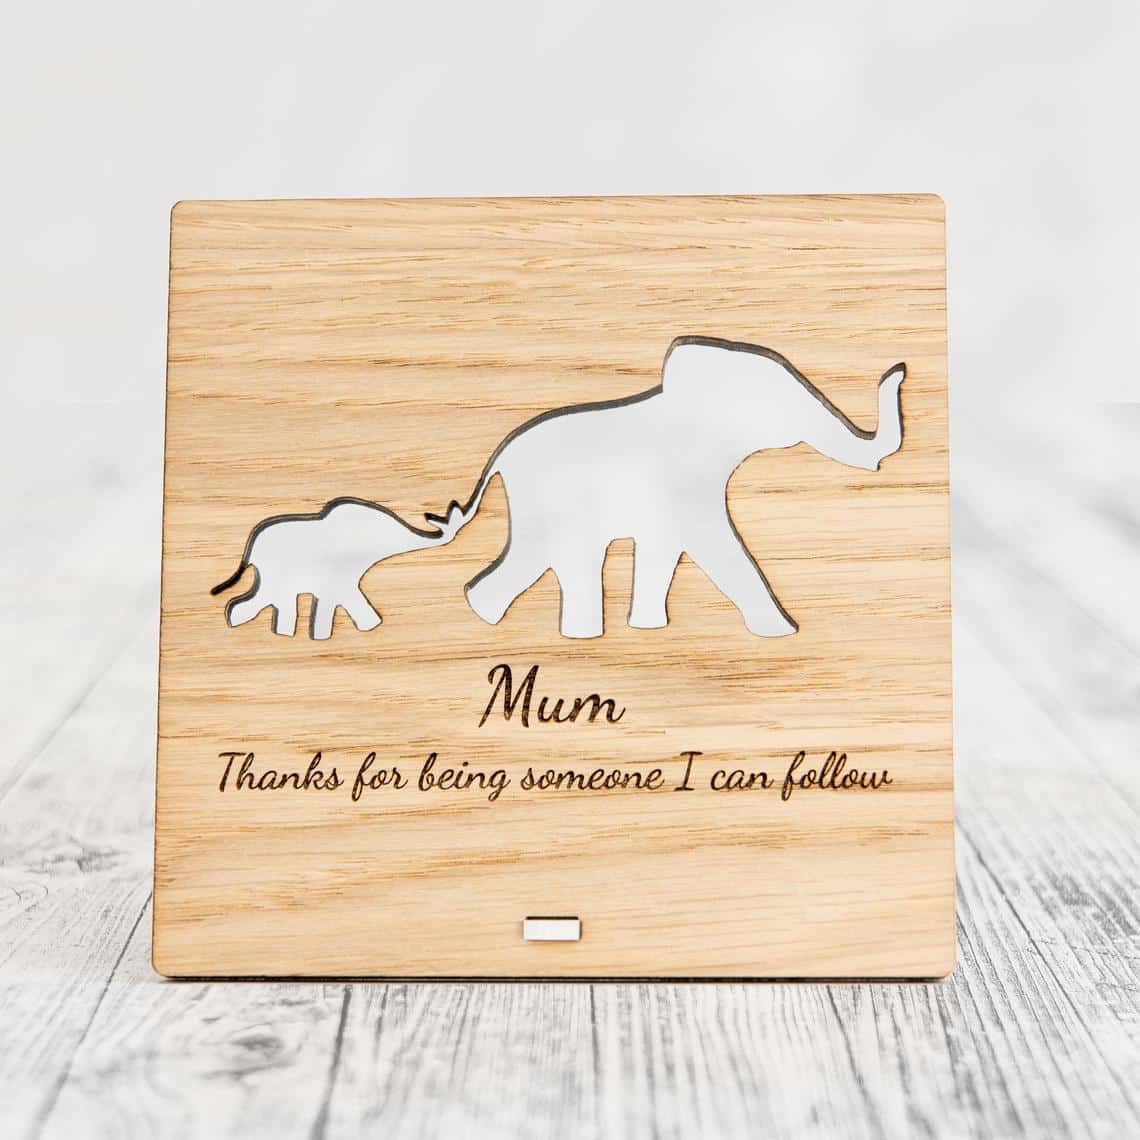 Special, Customized, Heartwarming Plaques